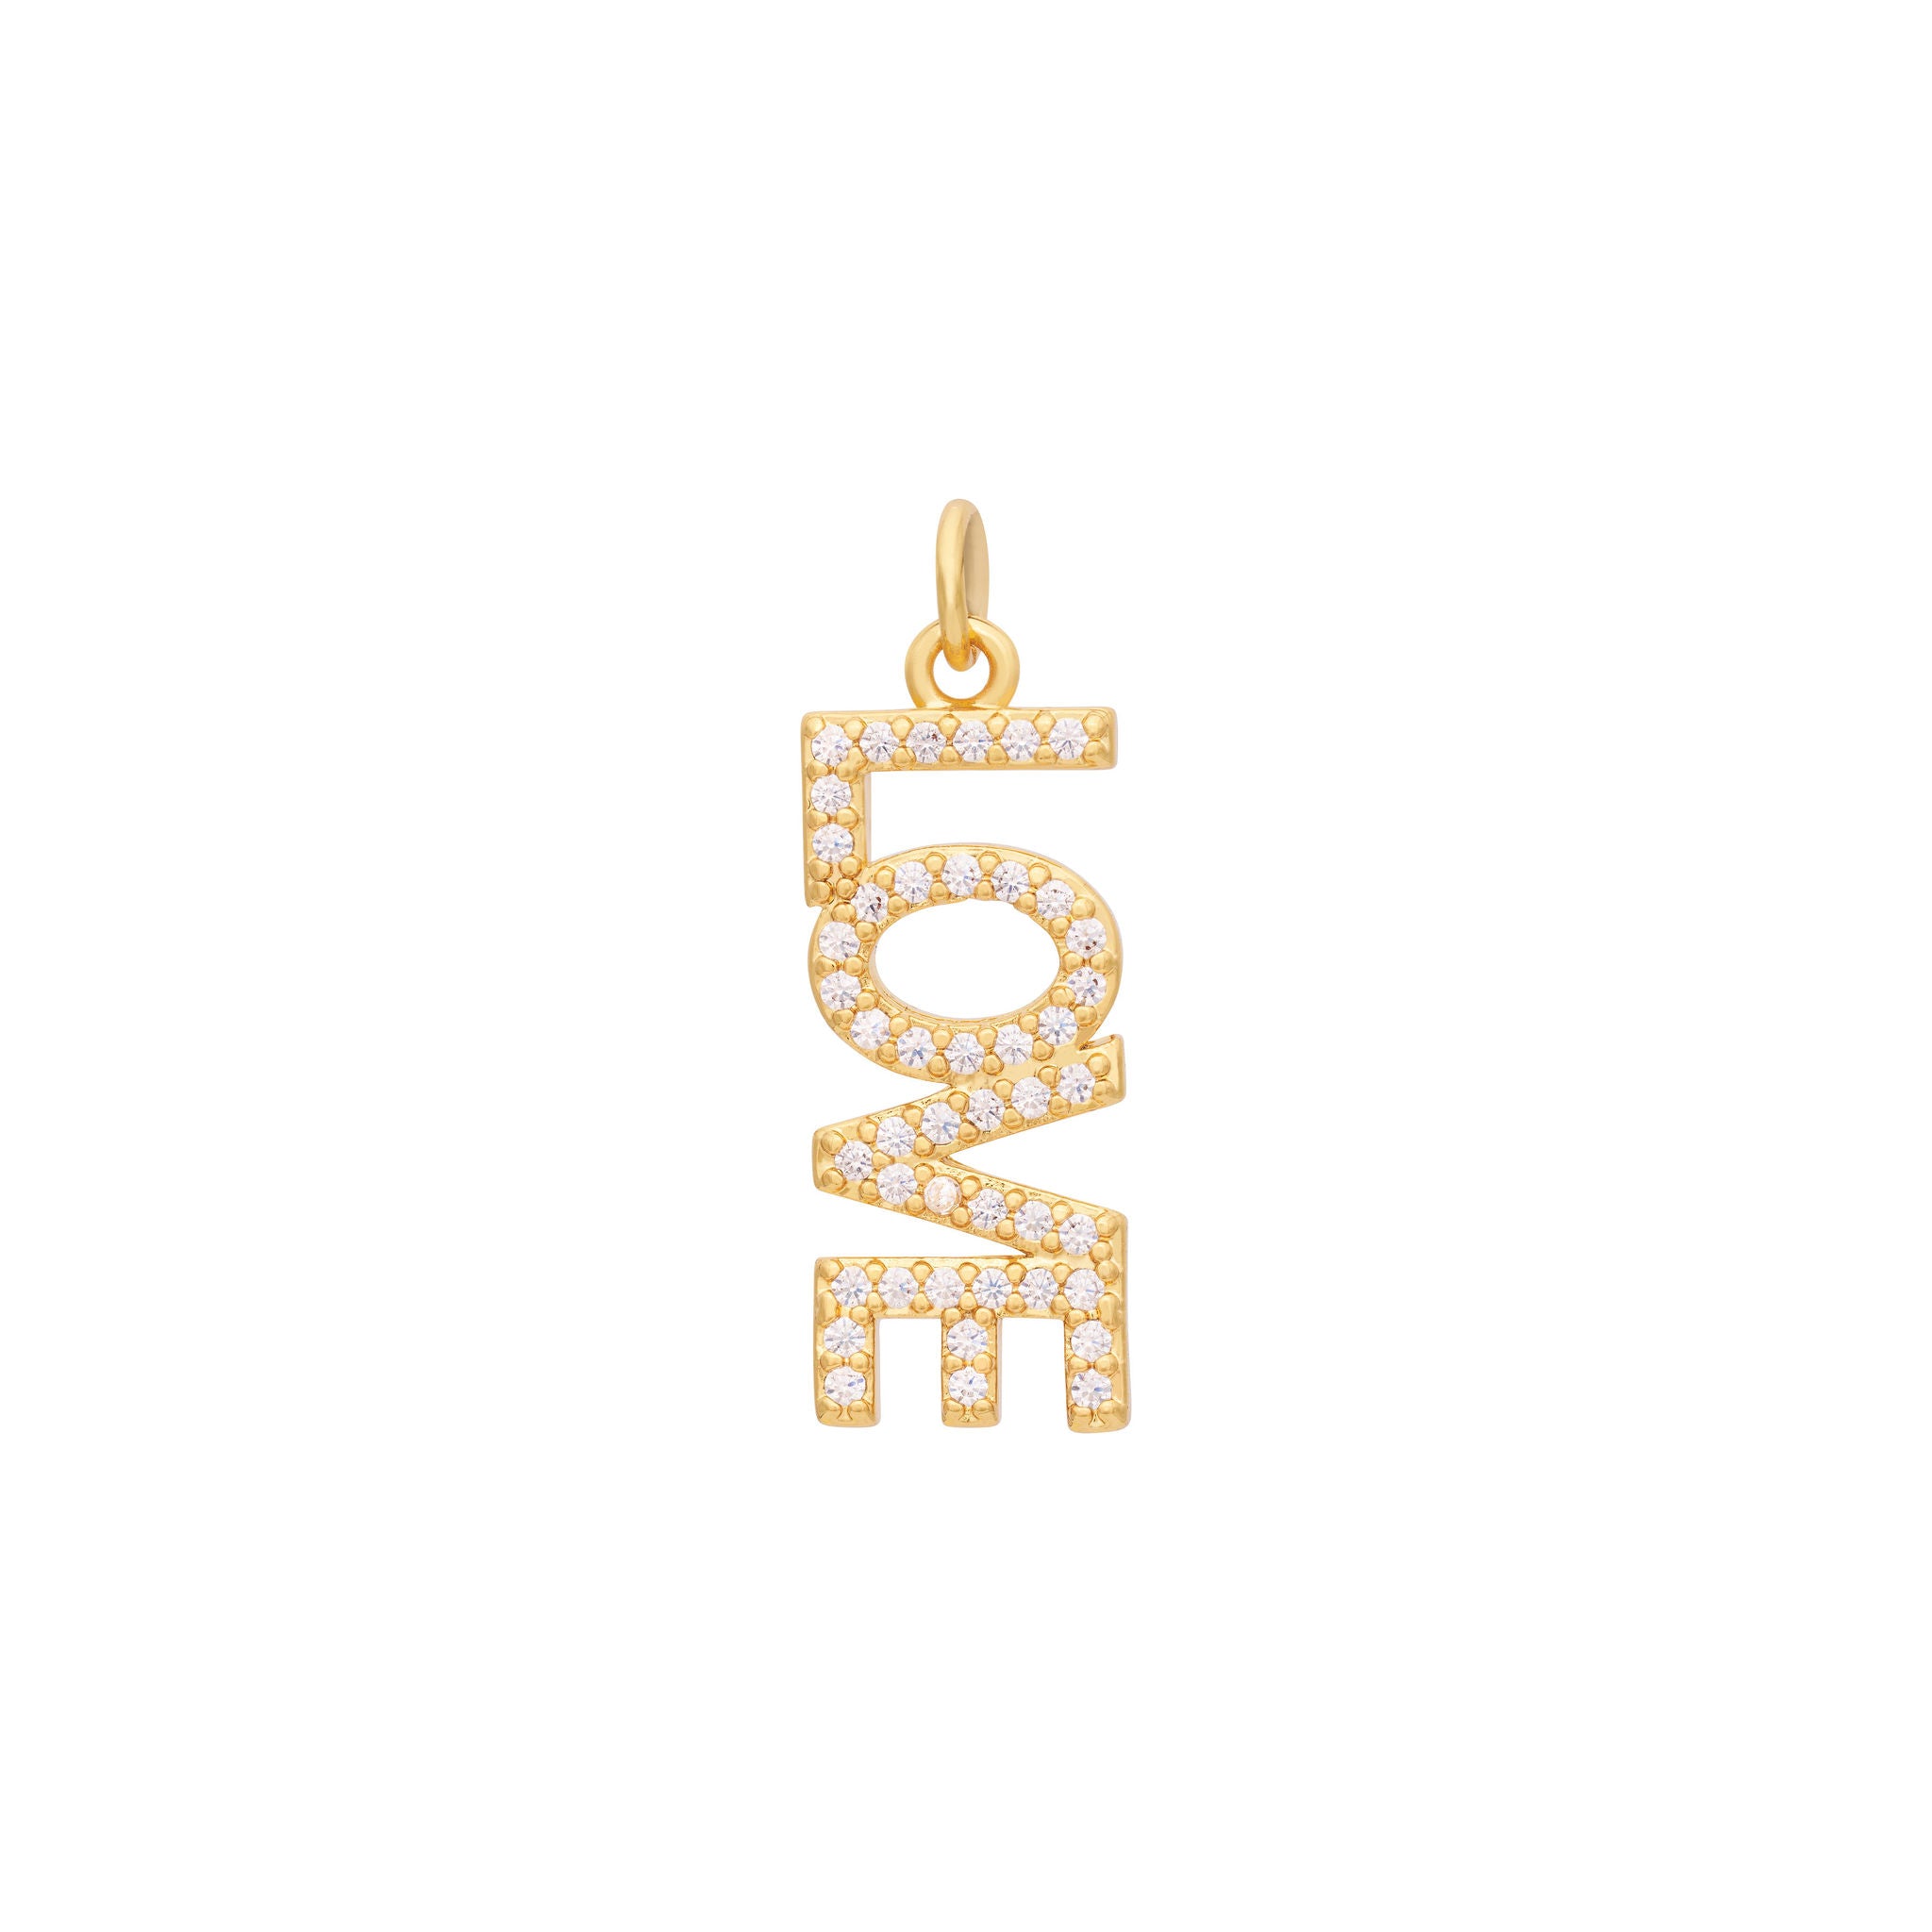 Love Letters Charm - Gold